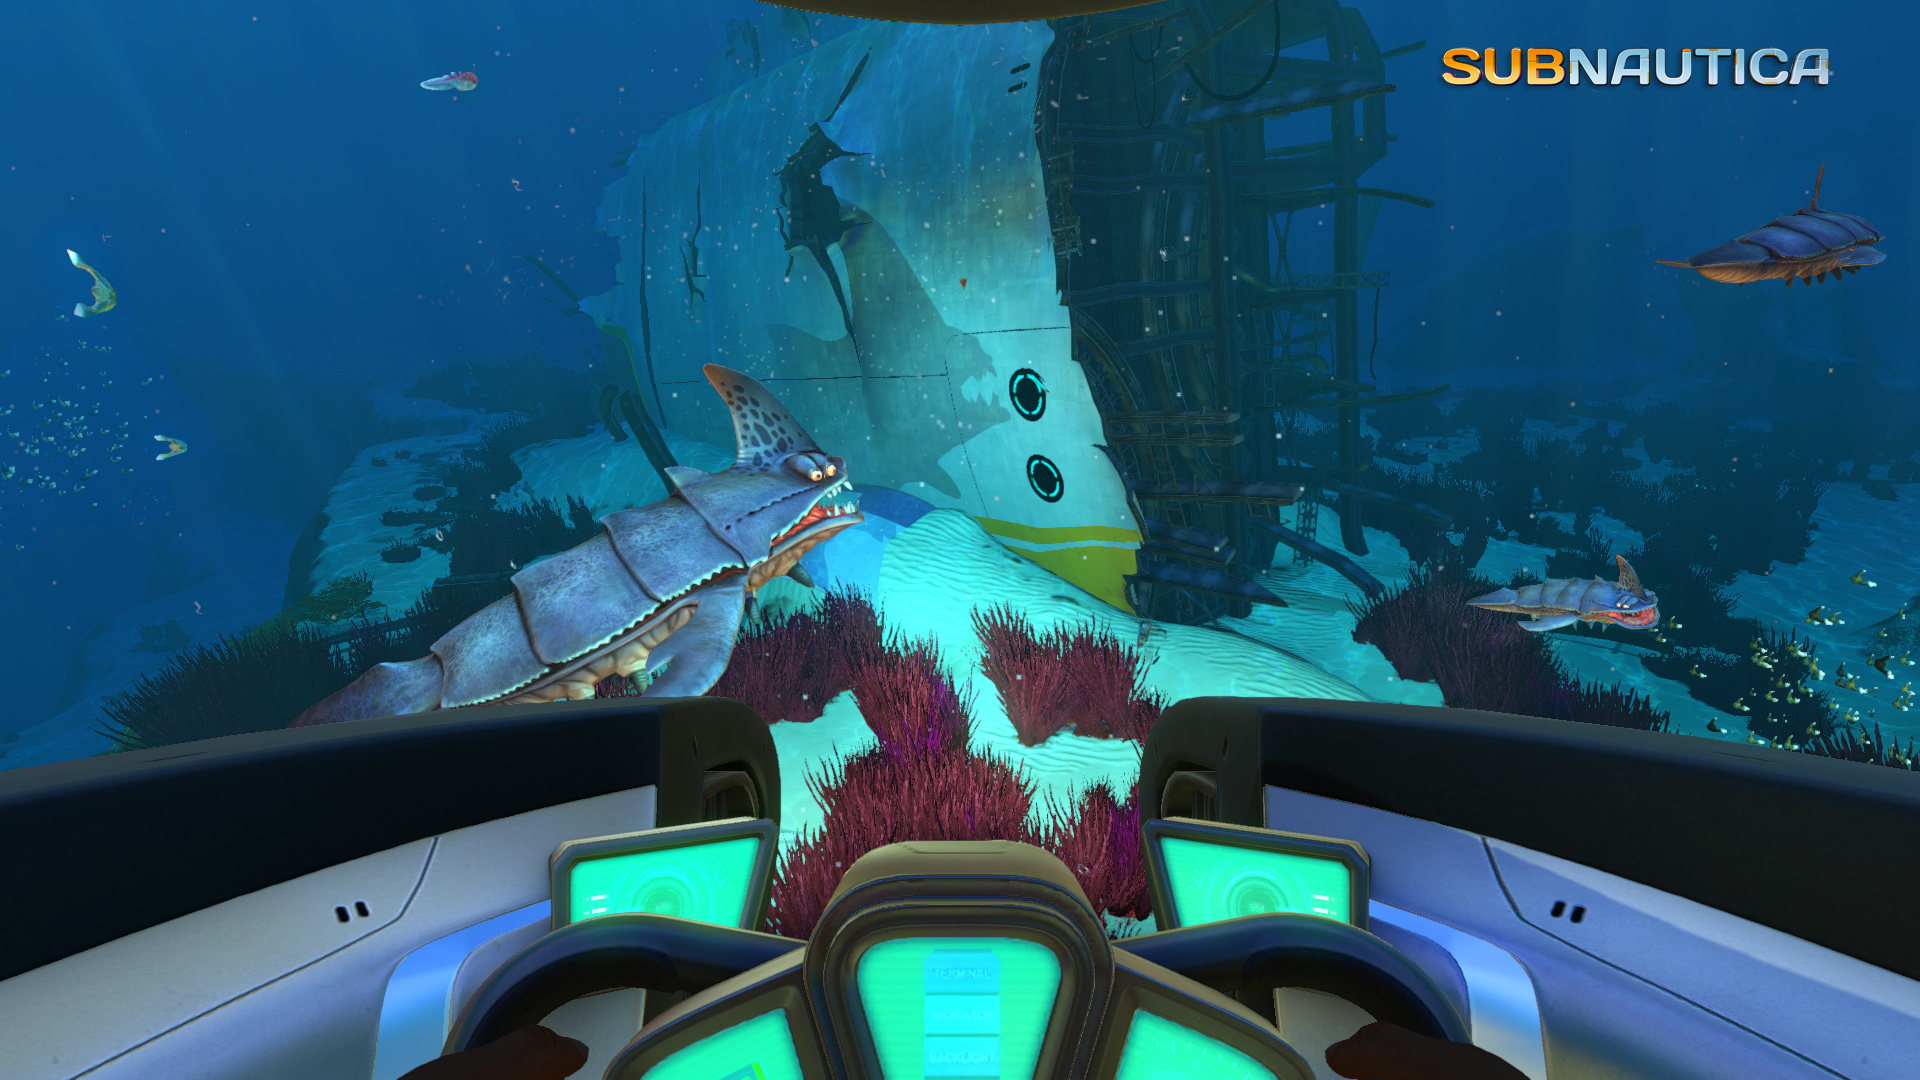 Save 67% on Subnautica on Steam